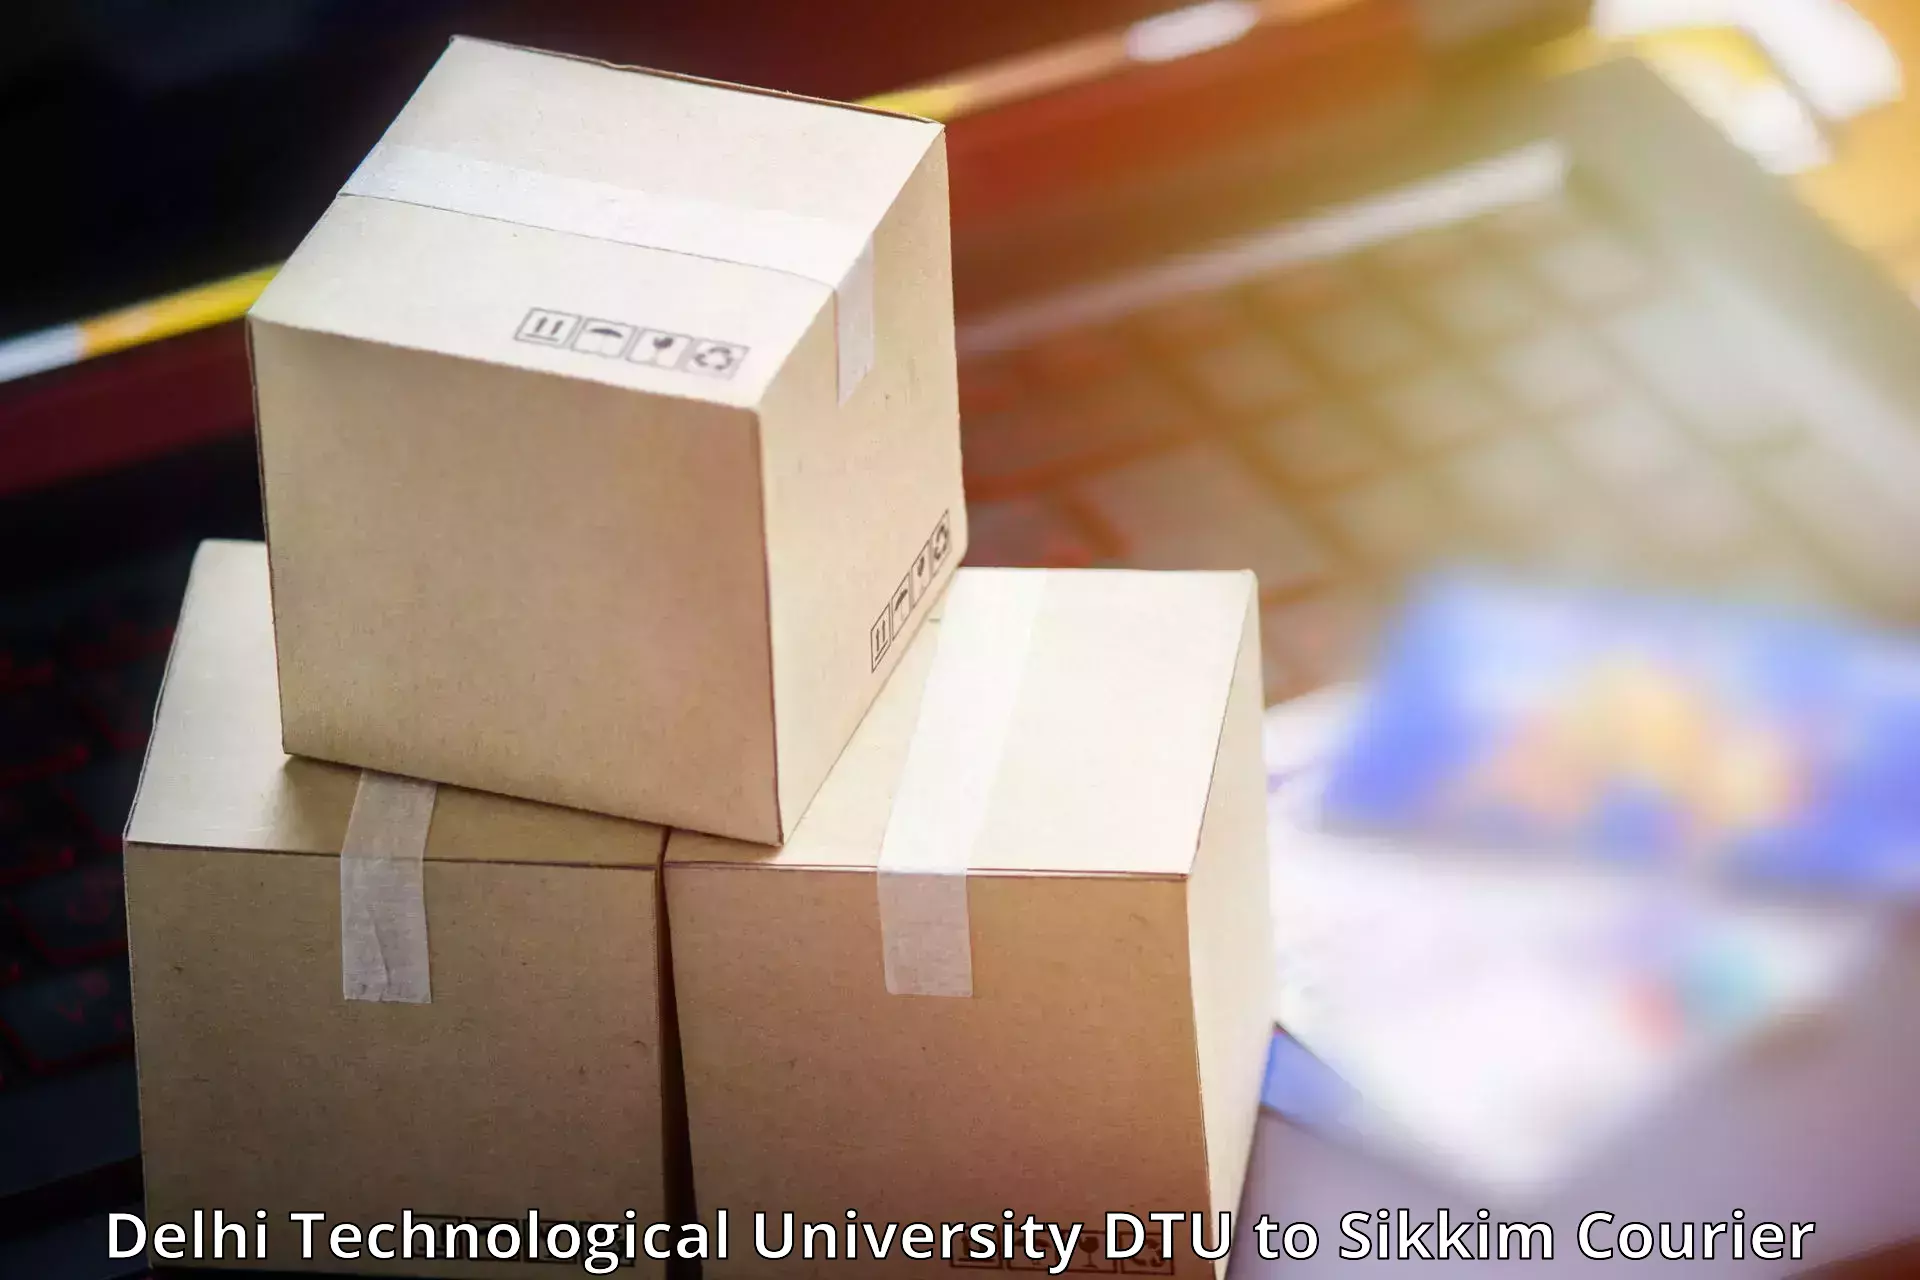 Optimized shipping services Delhi Technological University DTU to Pelling